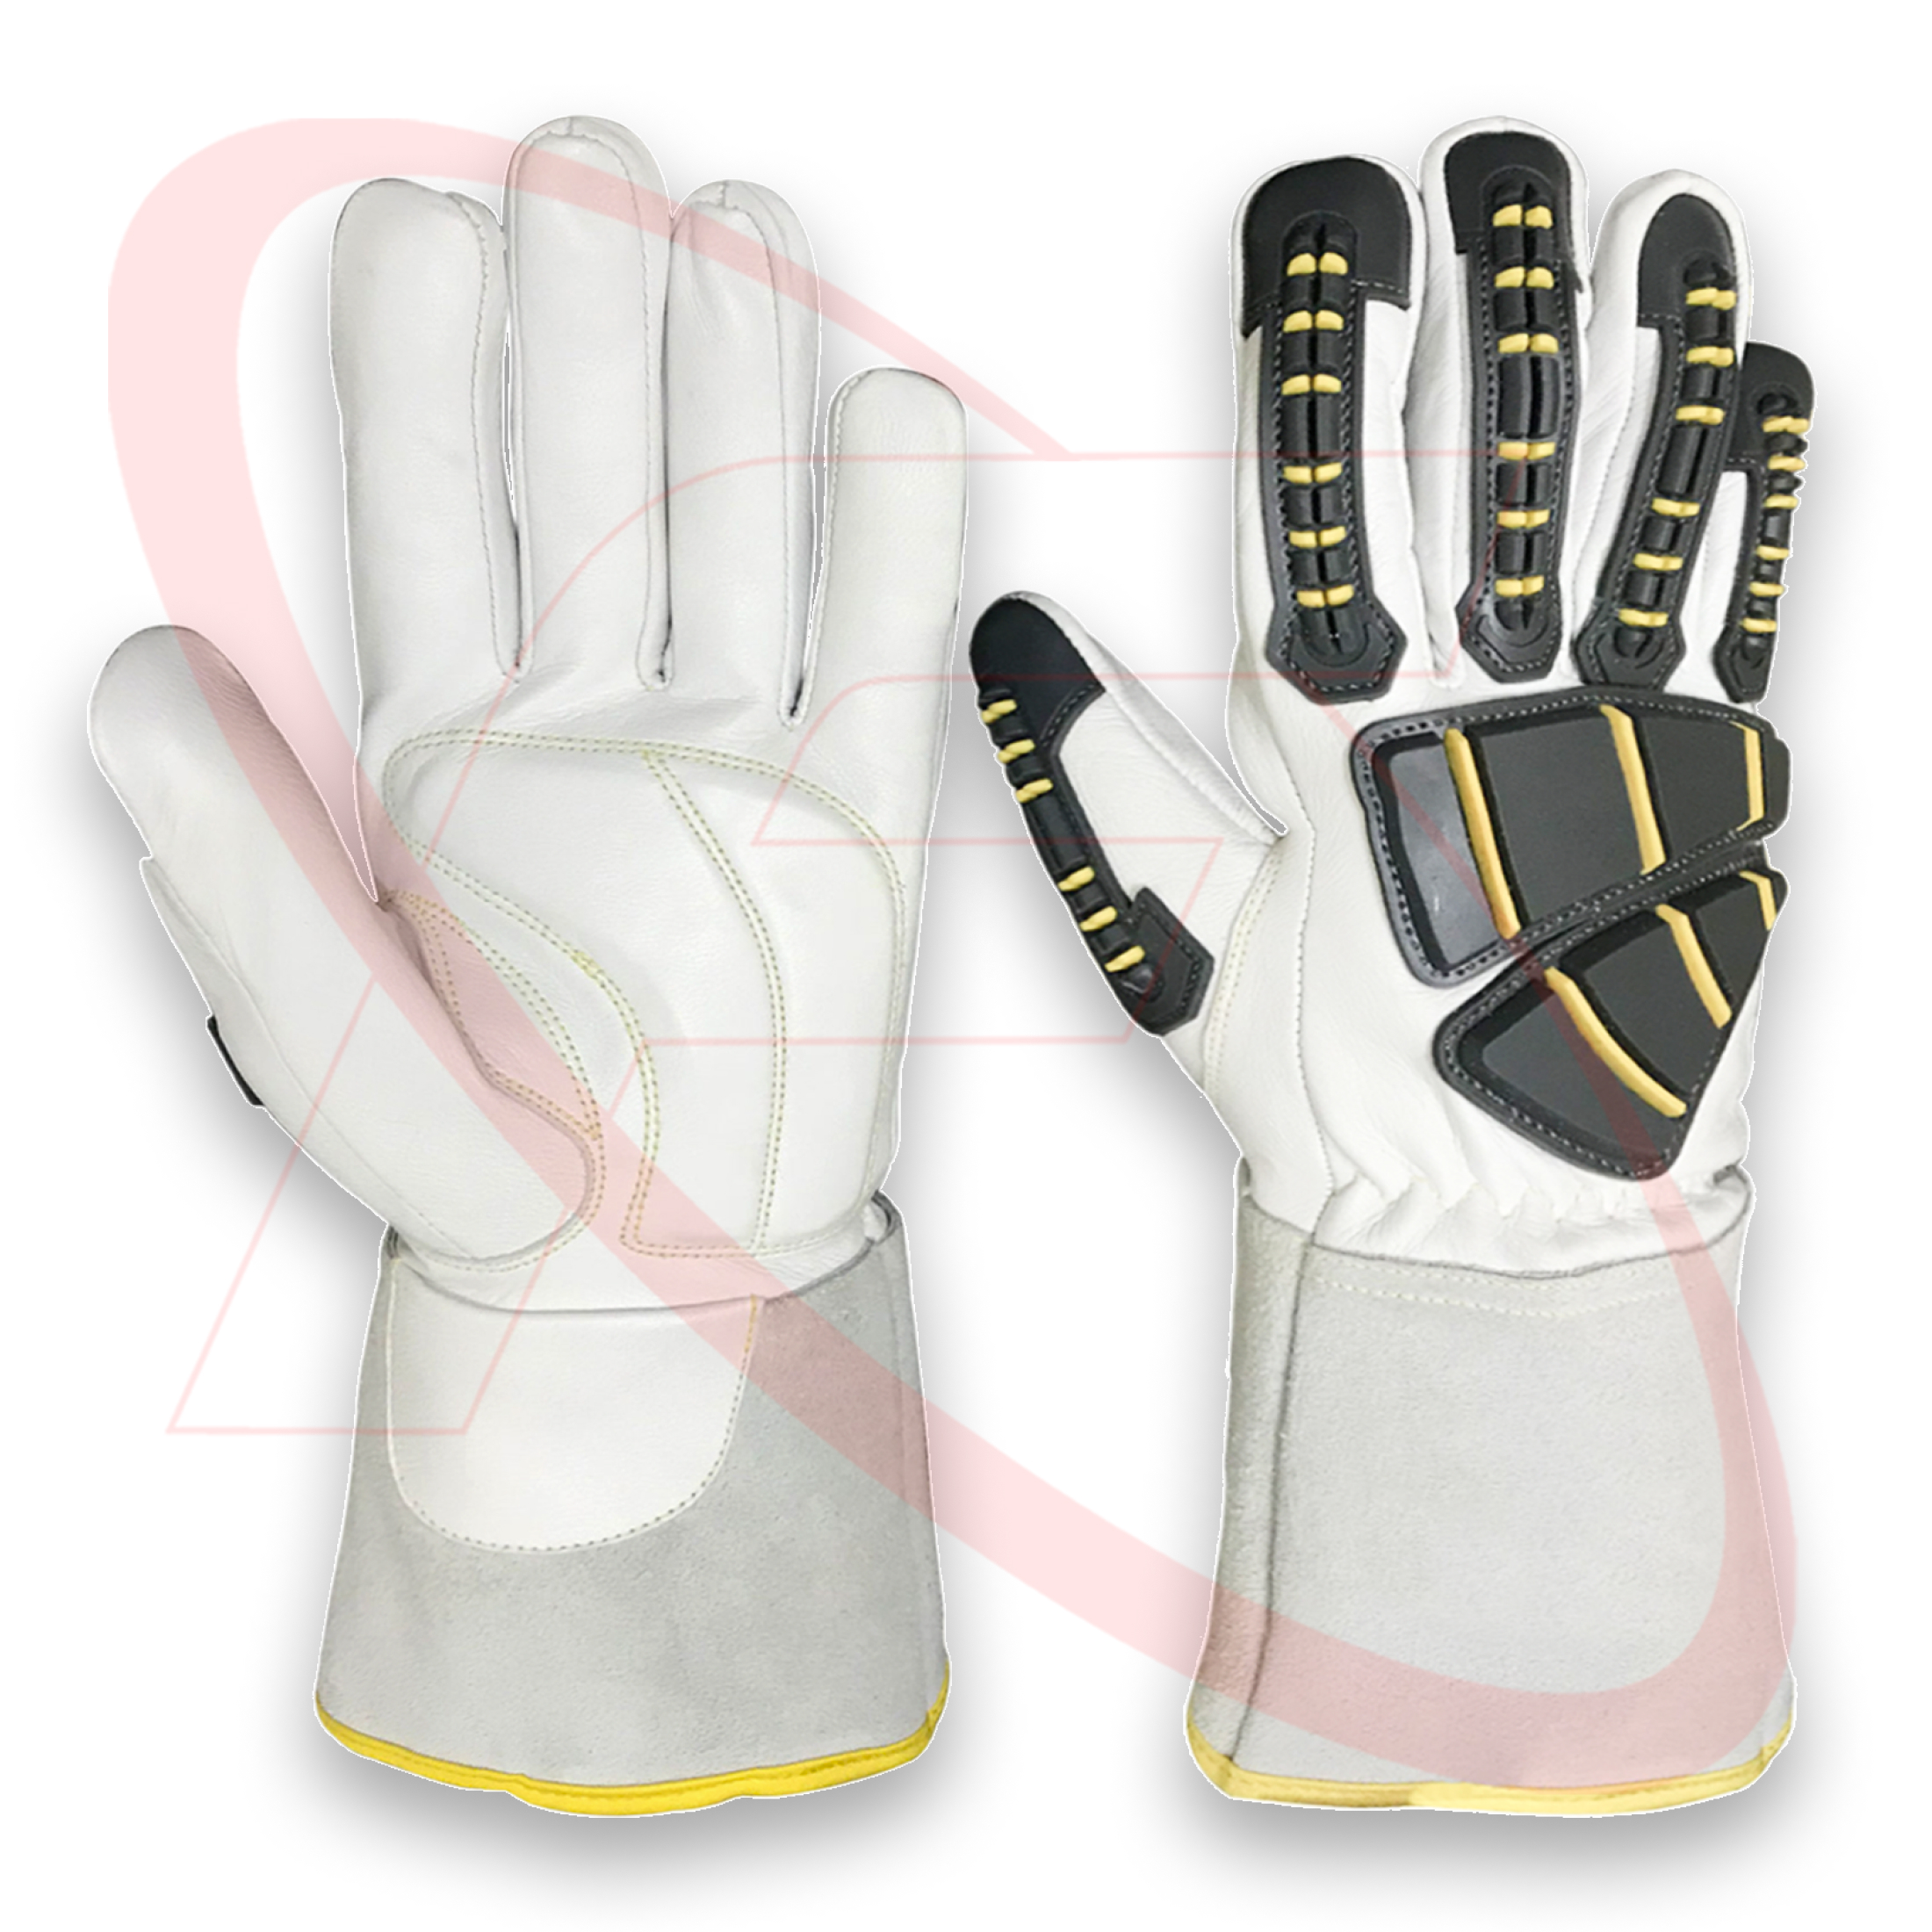 Impact Protective Driver Gloves in Goatskin Leather Un-lined Safety Driving Gloves